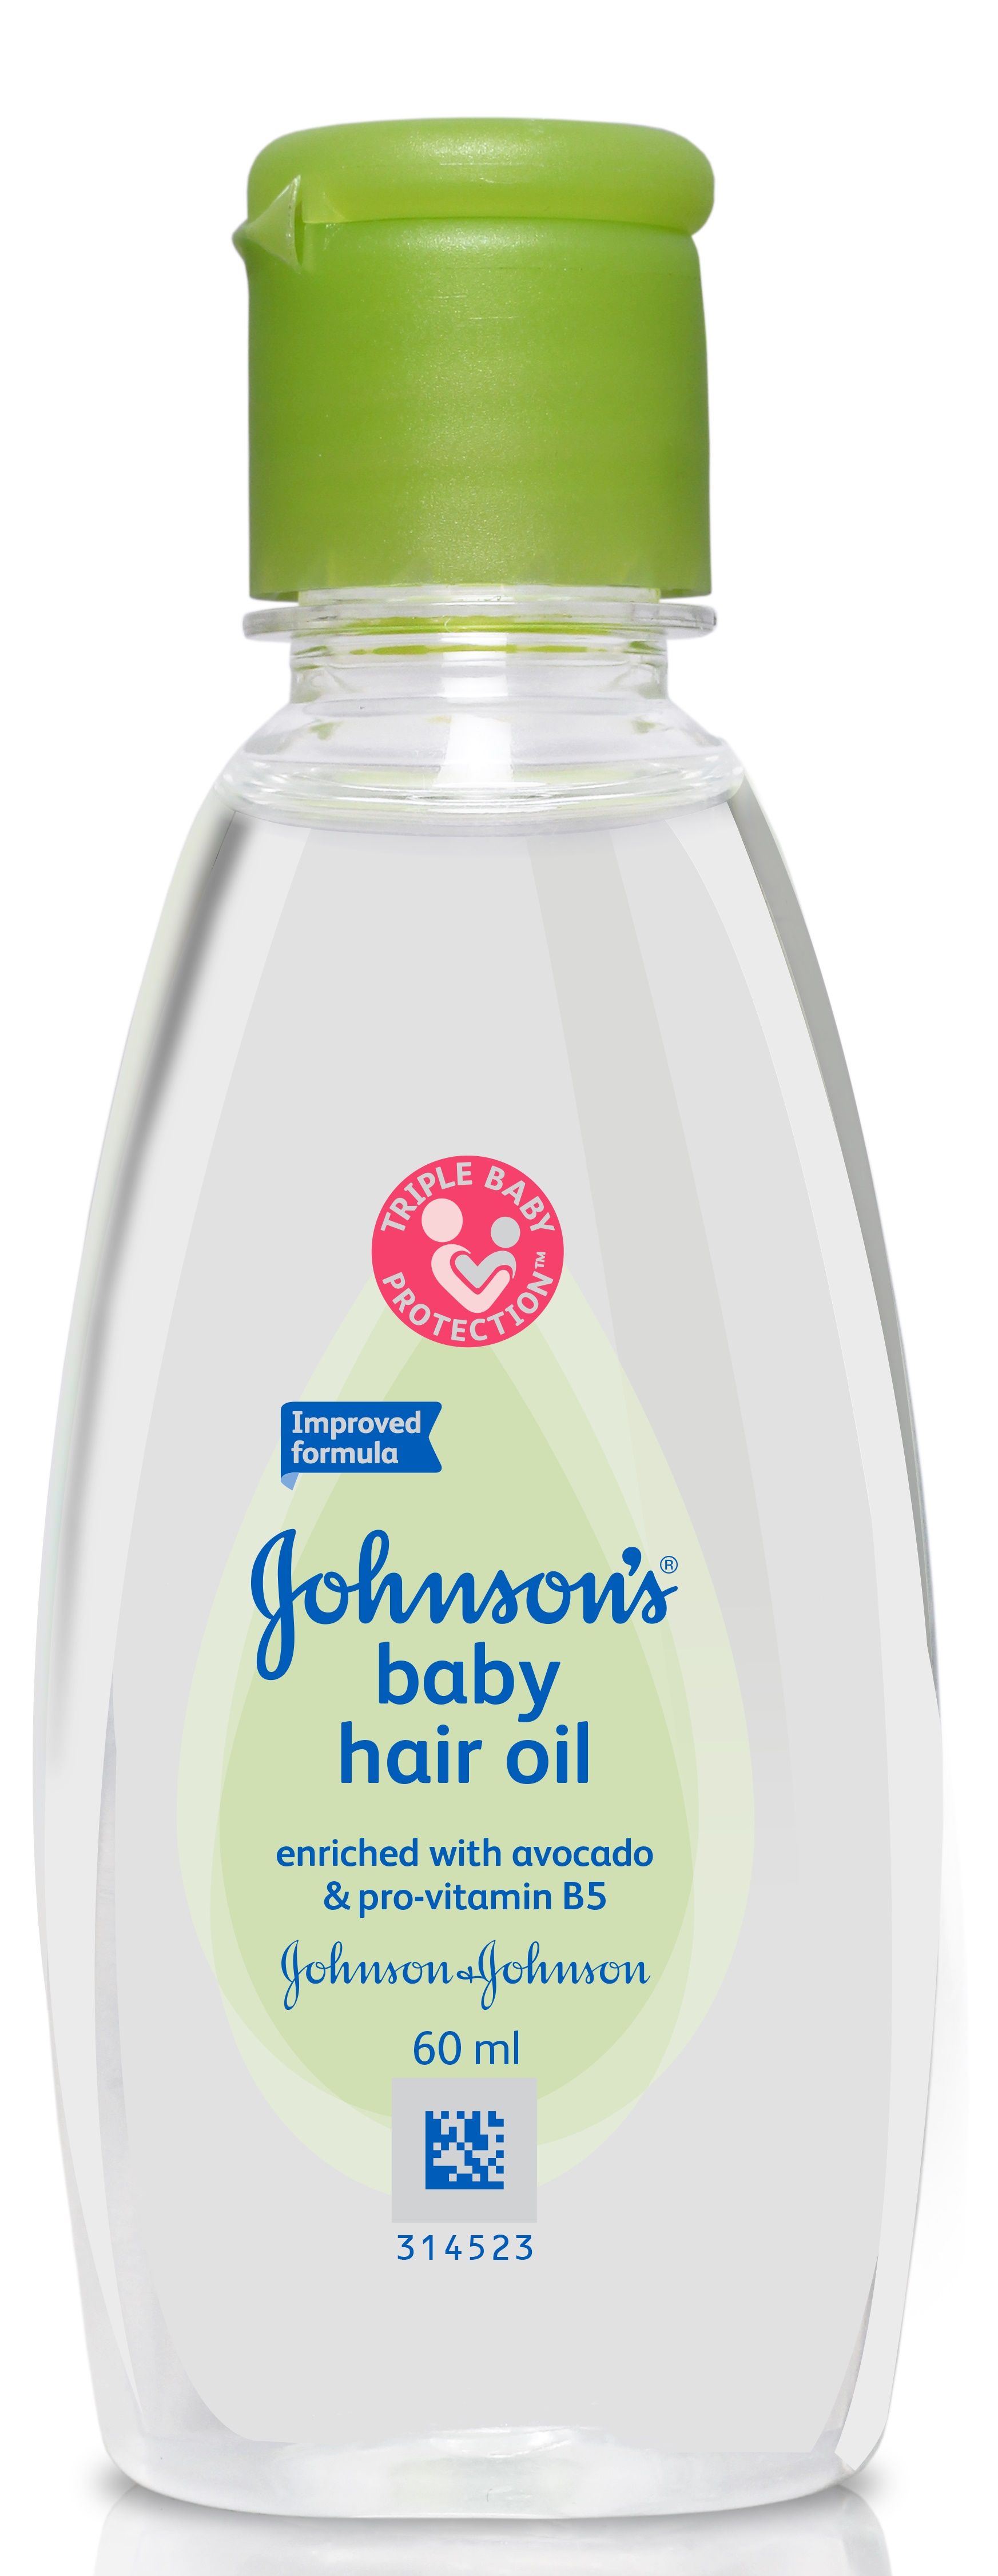 Johnson S Baby Hair Oil Buy Johnson S Baby Hair Oil Online At Best Price In India Nykaa